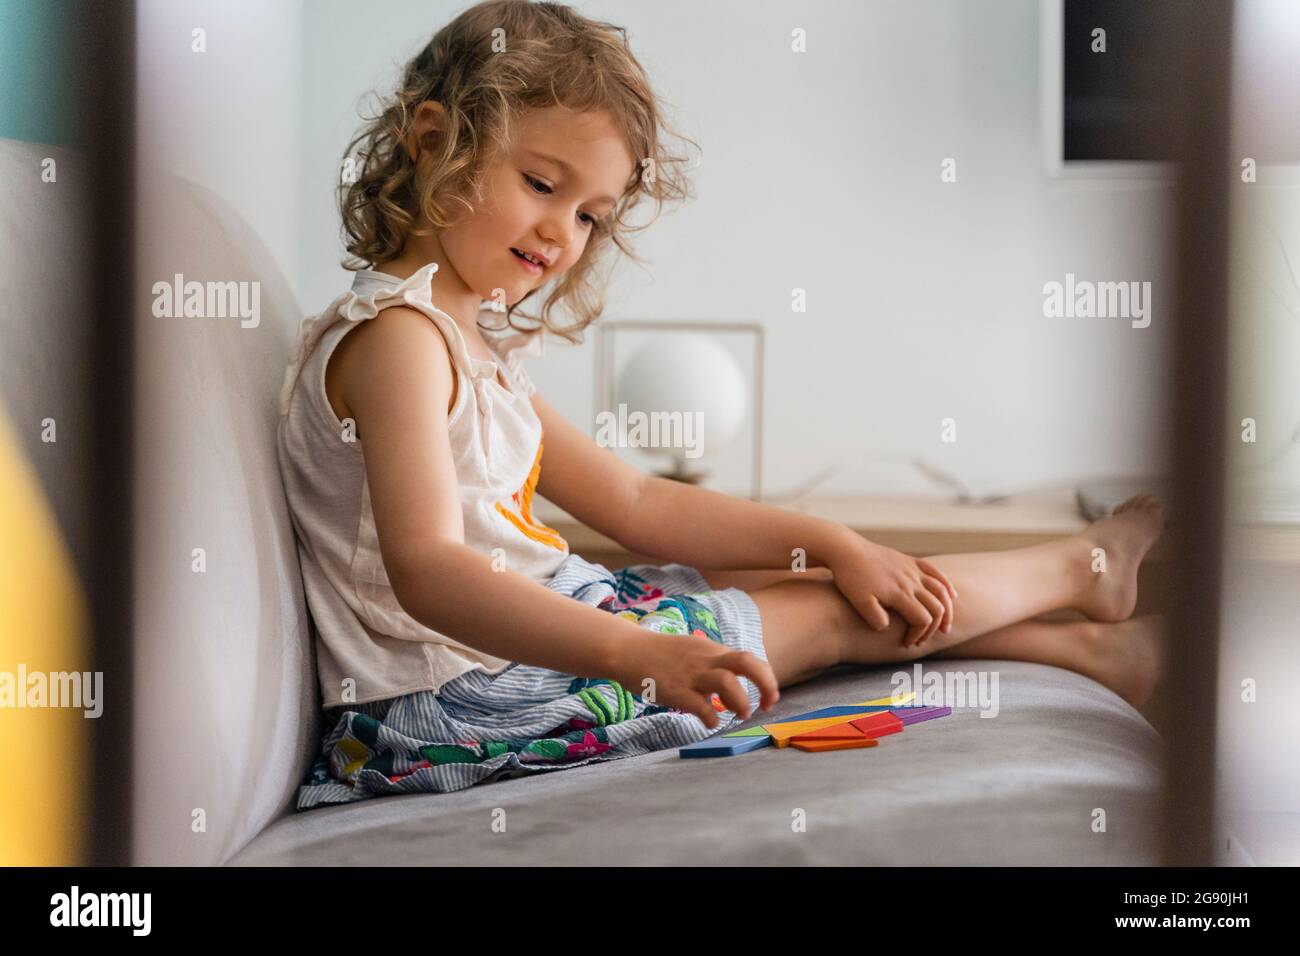 Smiling girl arranging puzzle while sitting at home Stock Photo